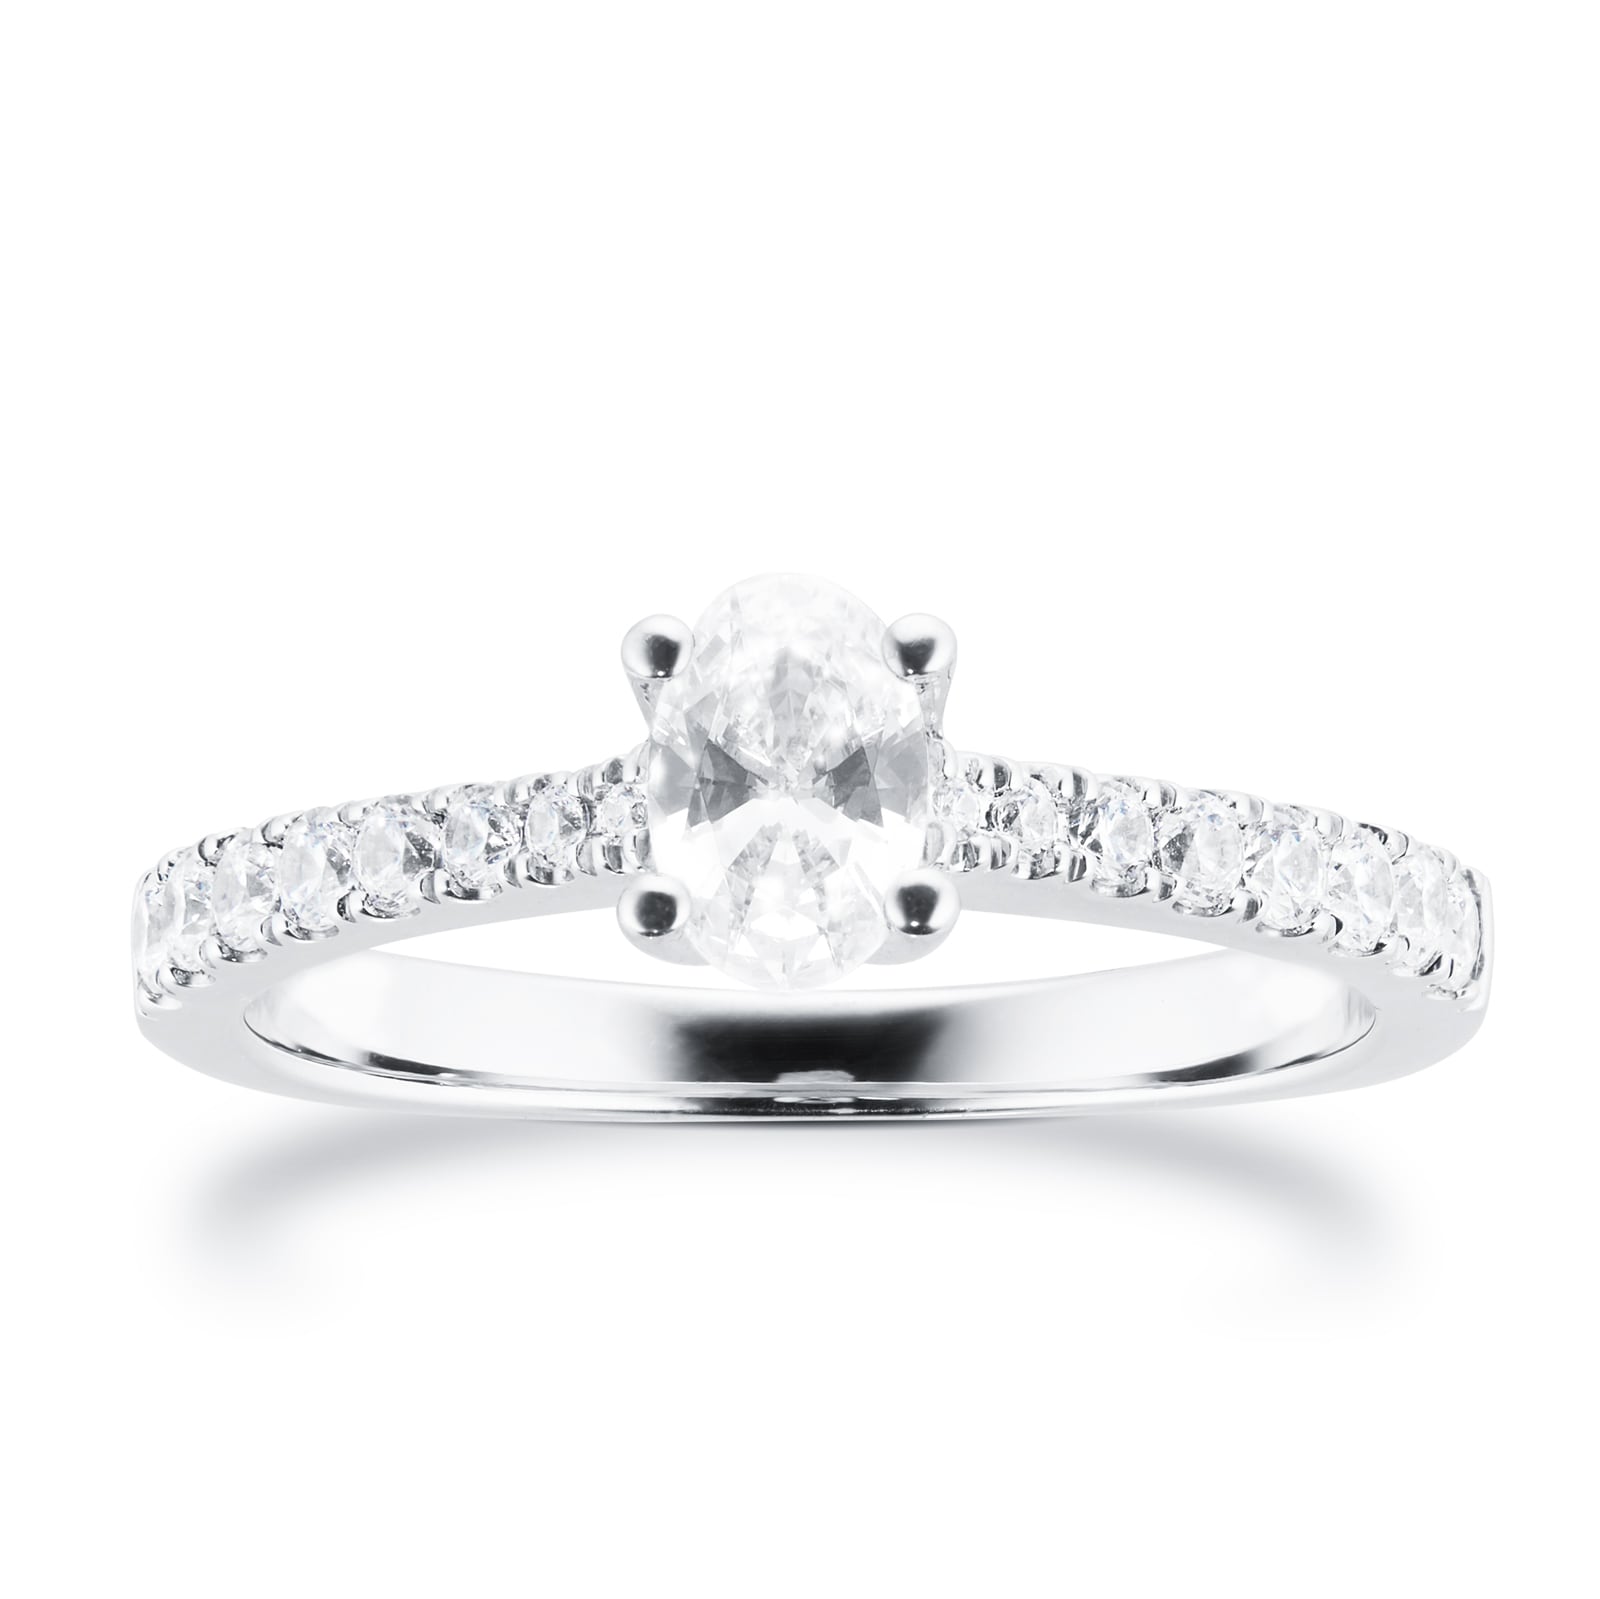 Platinum 0.70cttw Goldsmiths Brightest Diamond Oval Cut Solitaire Engagement Ring - Ring Size M